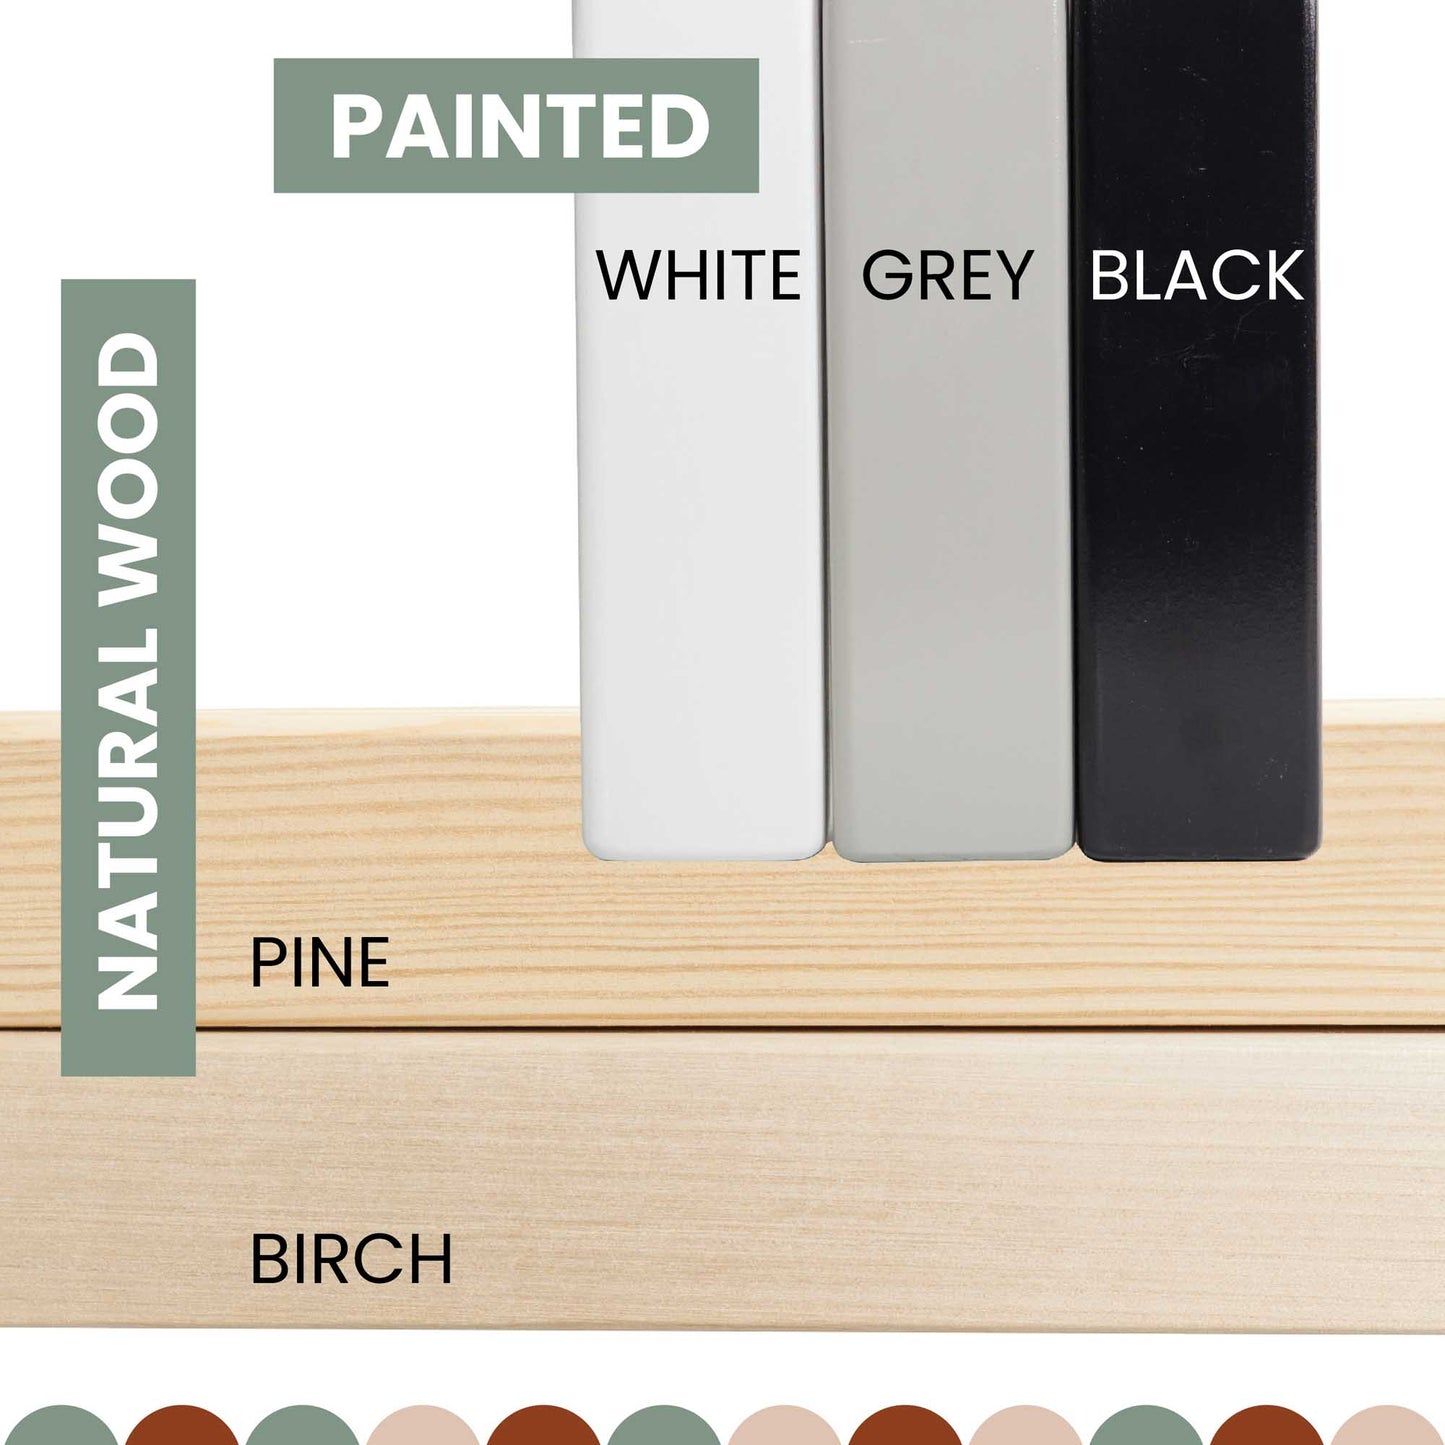 Selection of material and color options, including non-painted pine, birch, and painted pine in white, grey, and black, offering a versatile range for personalized customization.